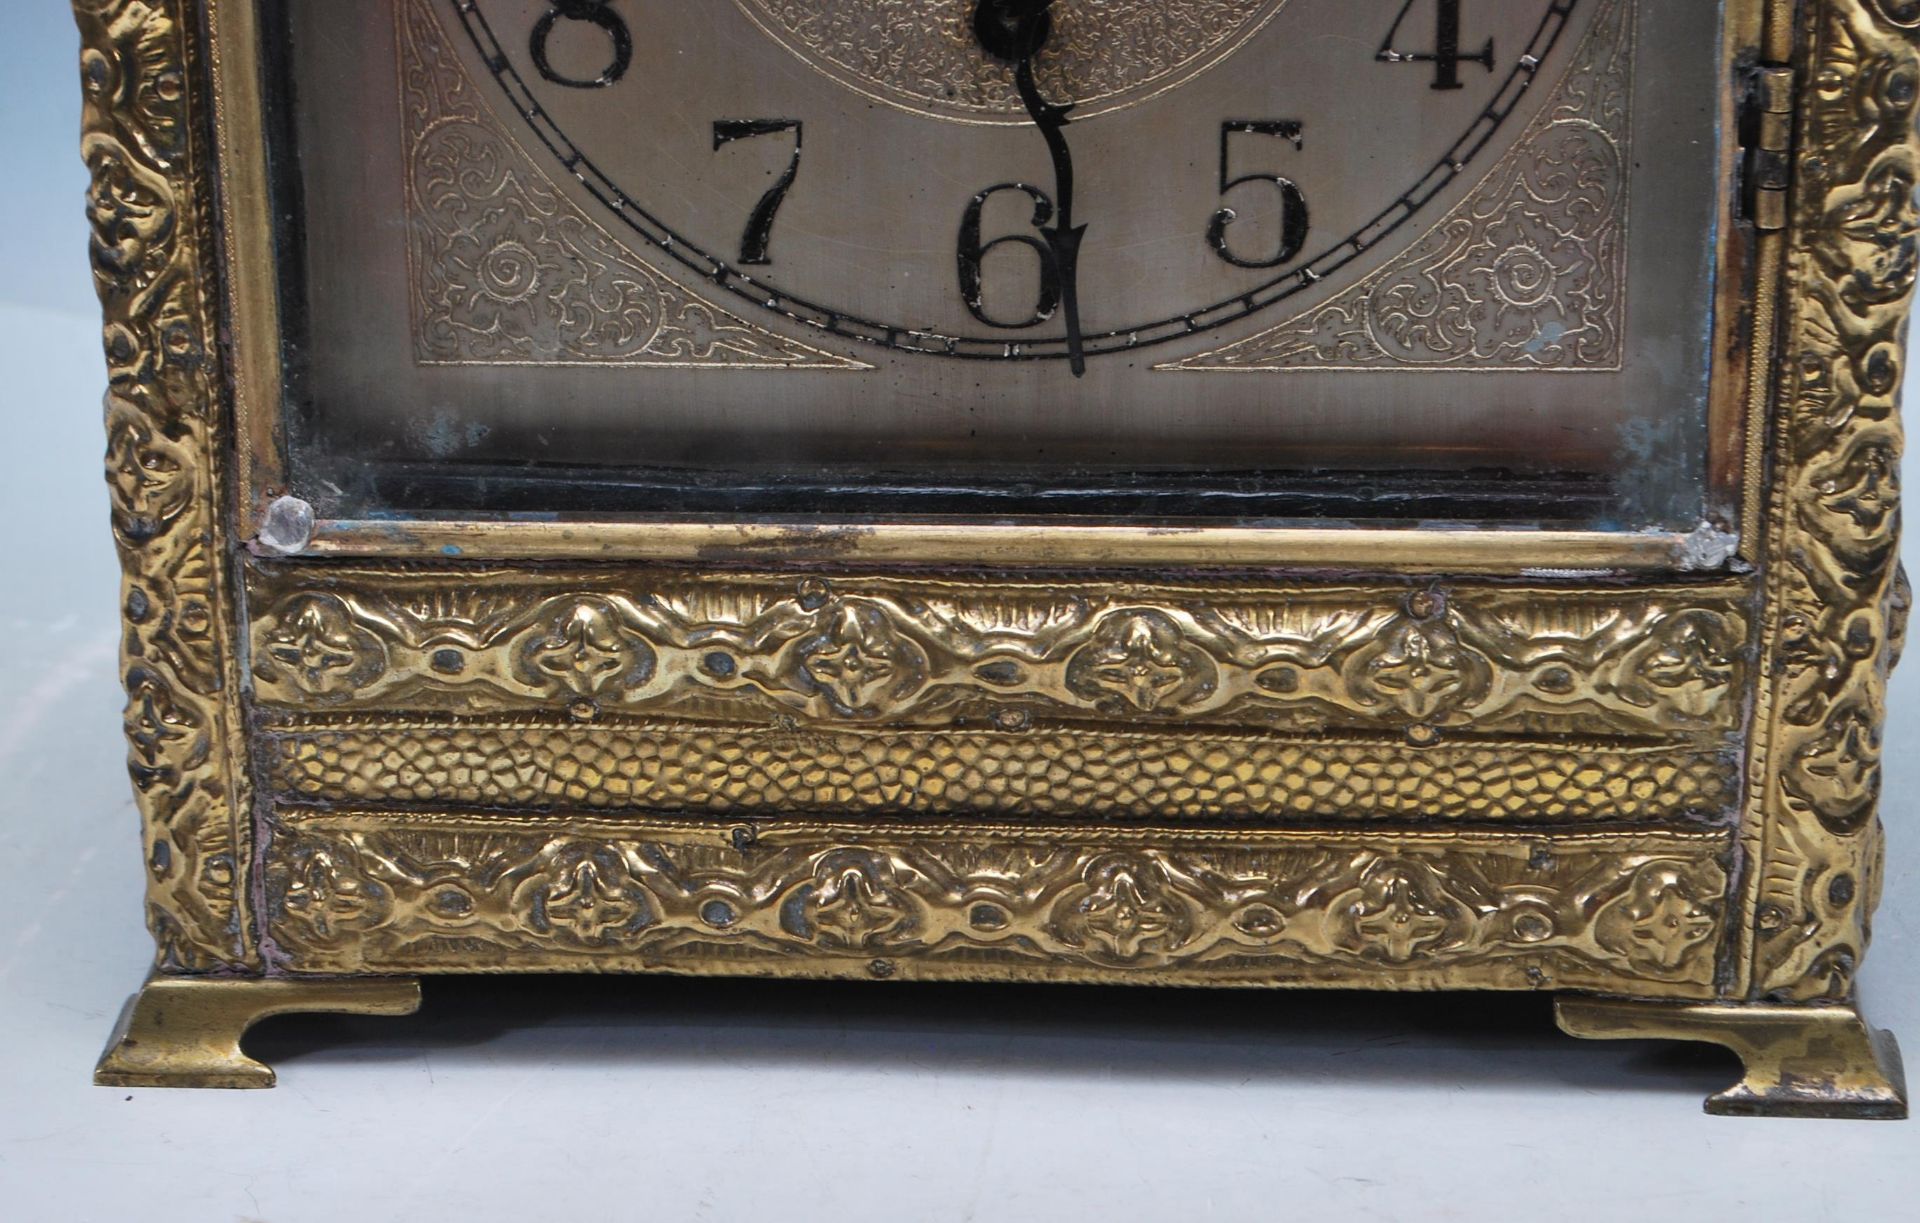 ANTIQUE LATE 19TH CENTURY BRASS CASED CLOCK WITH GOTHIC STYLING - Image 4 of 9